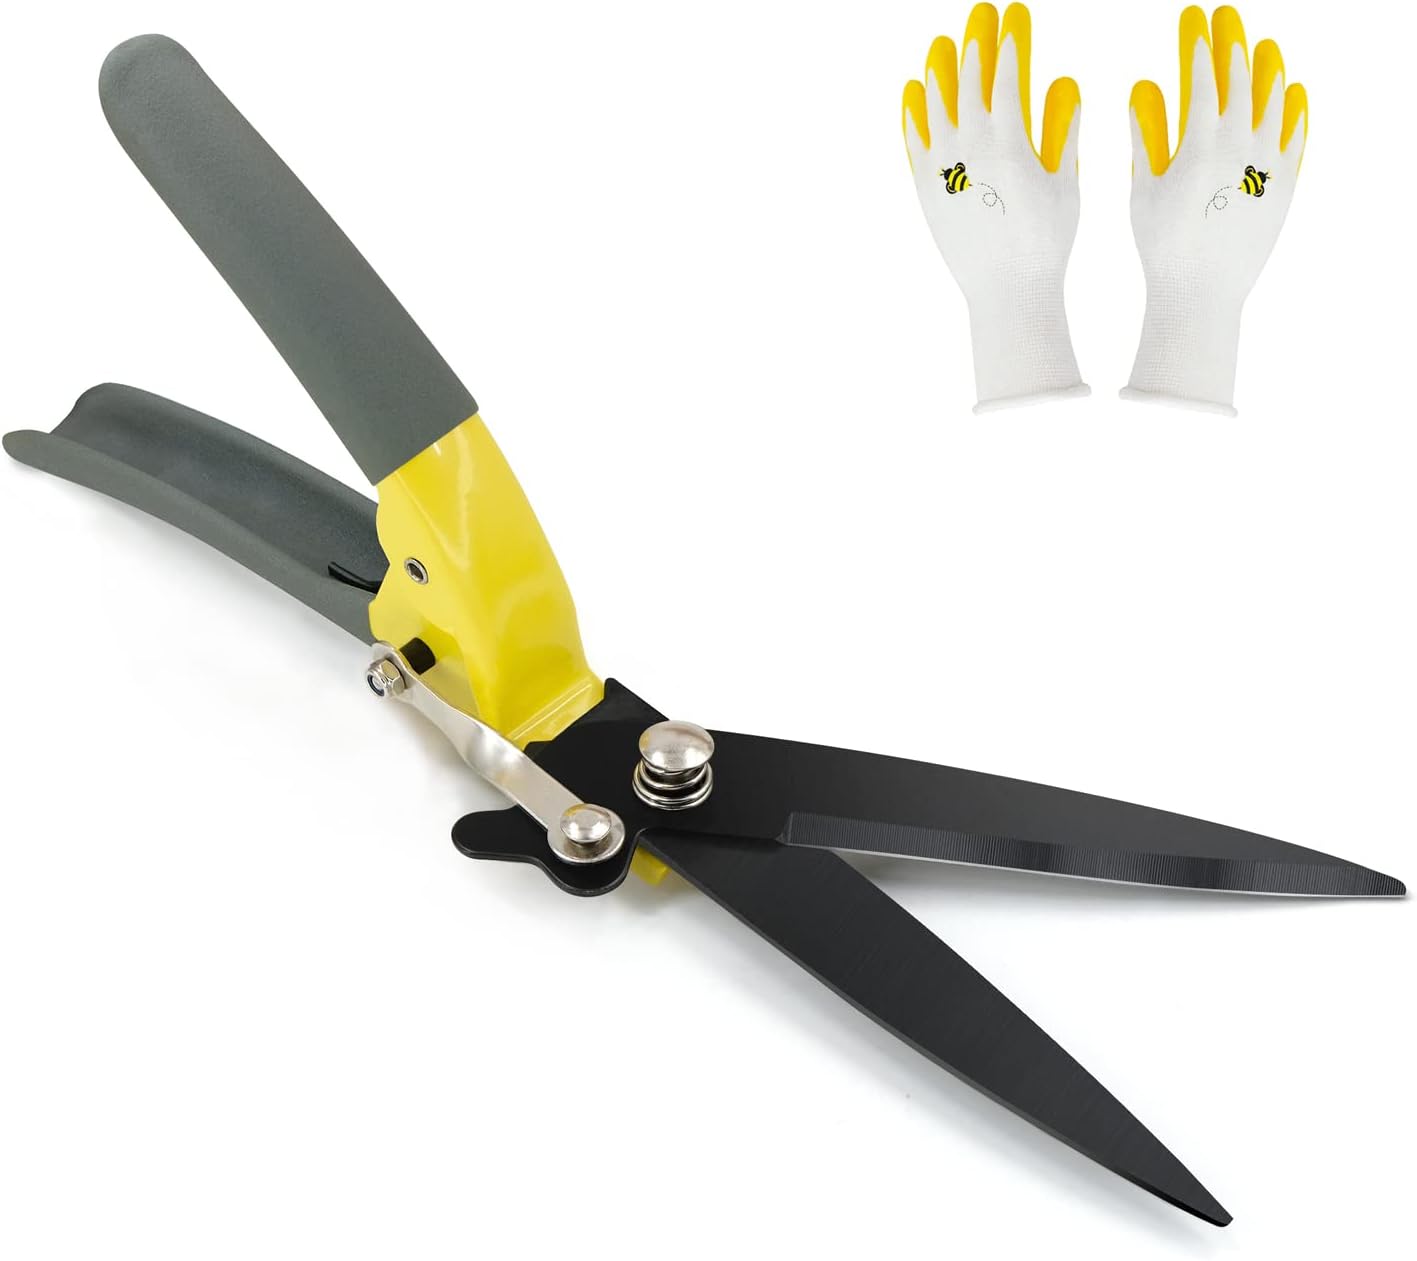 Byhagern Upgraded Grass Shears, Hand Grass Clippers, [...]